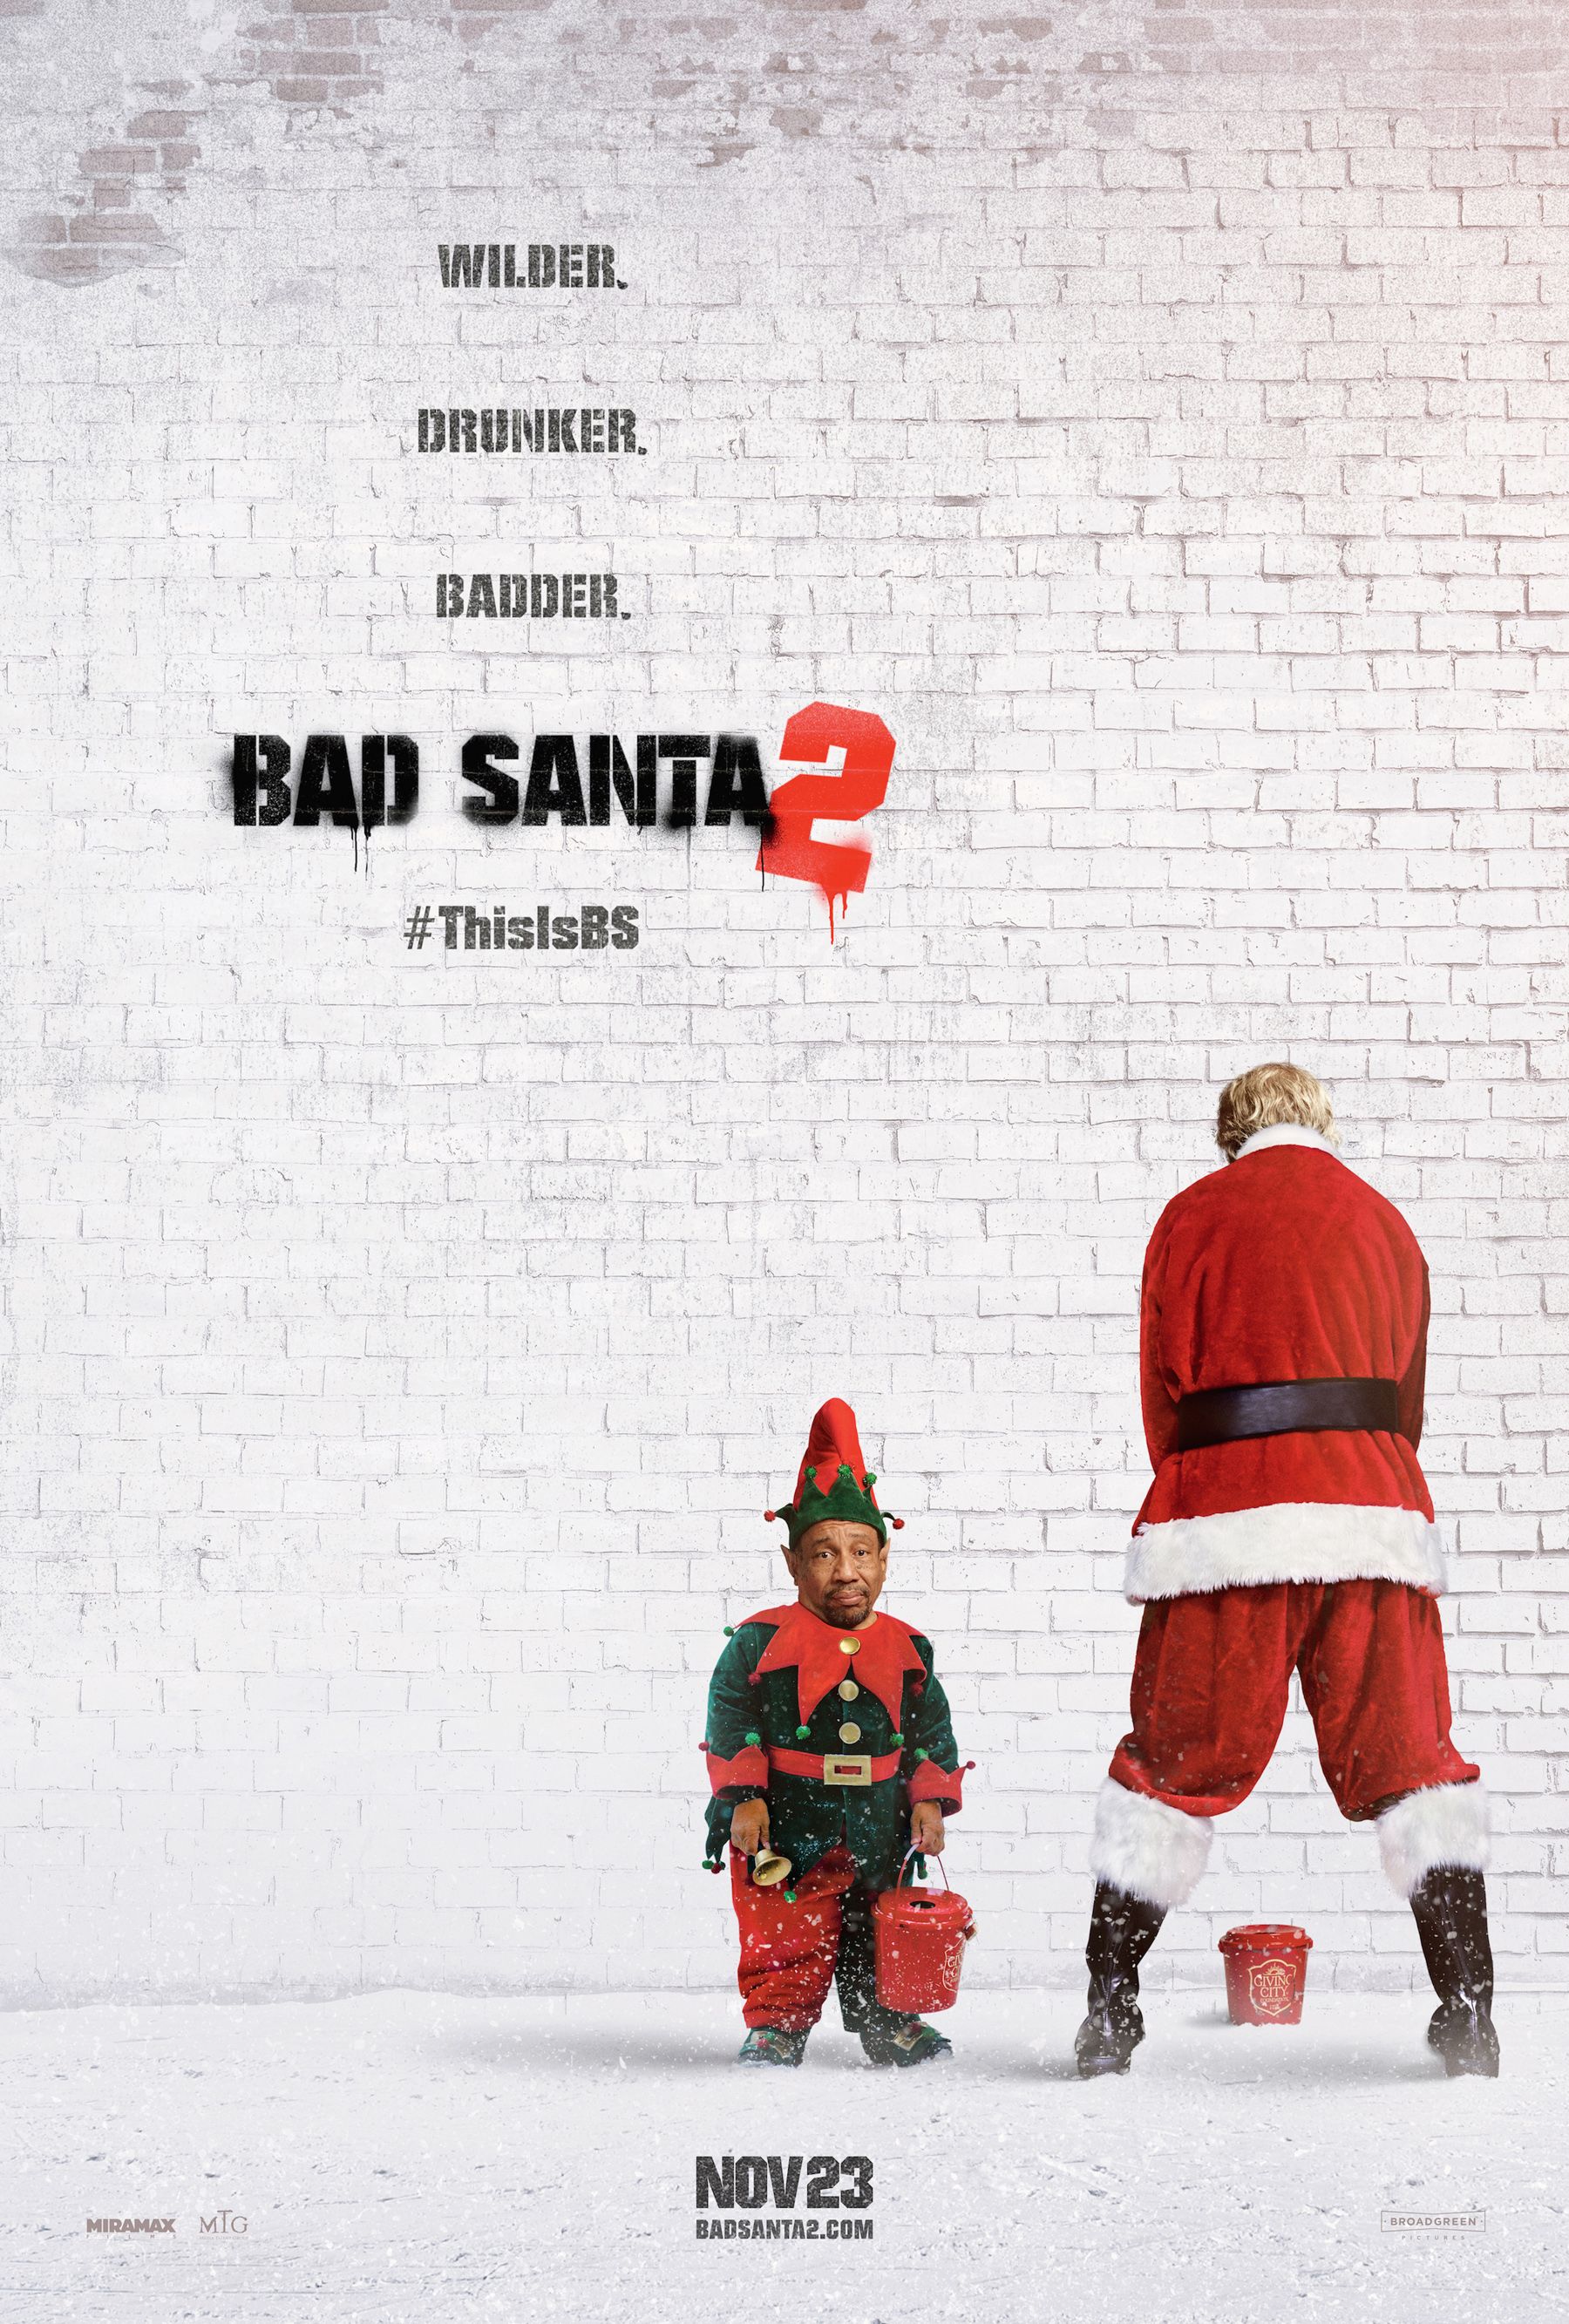 Bad Santa 2 Upcoming Movies. Movie Database. JoBlo.com, Release Date Latest Picture, Posters, Videos and News